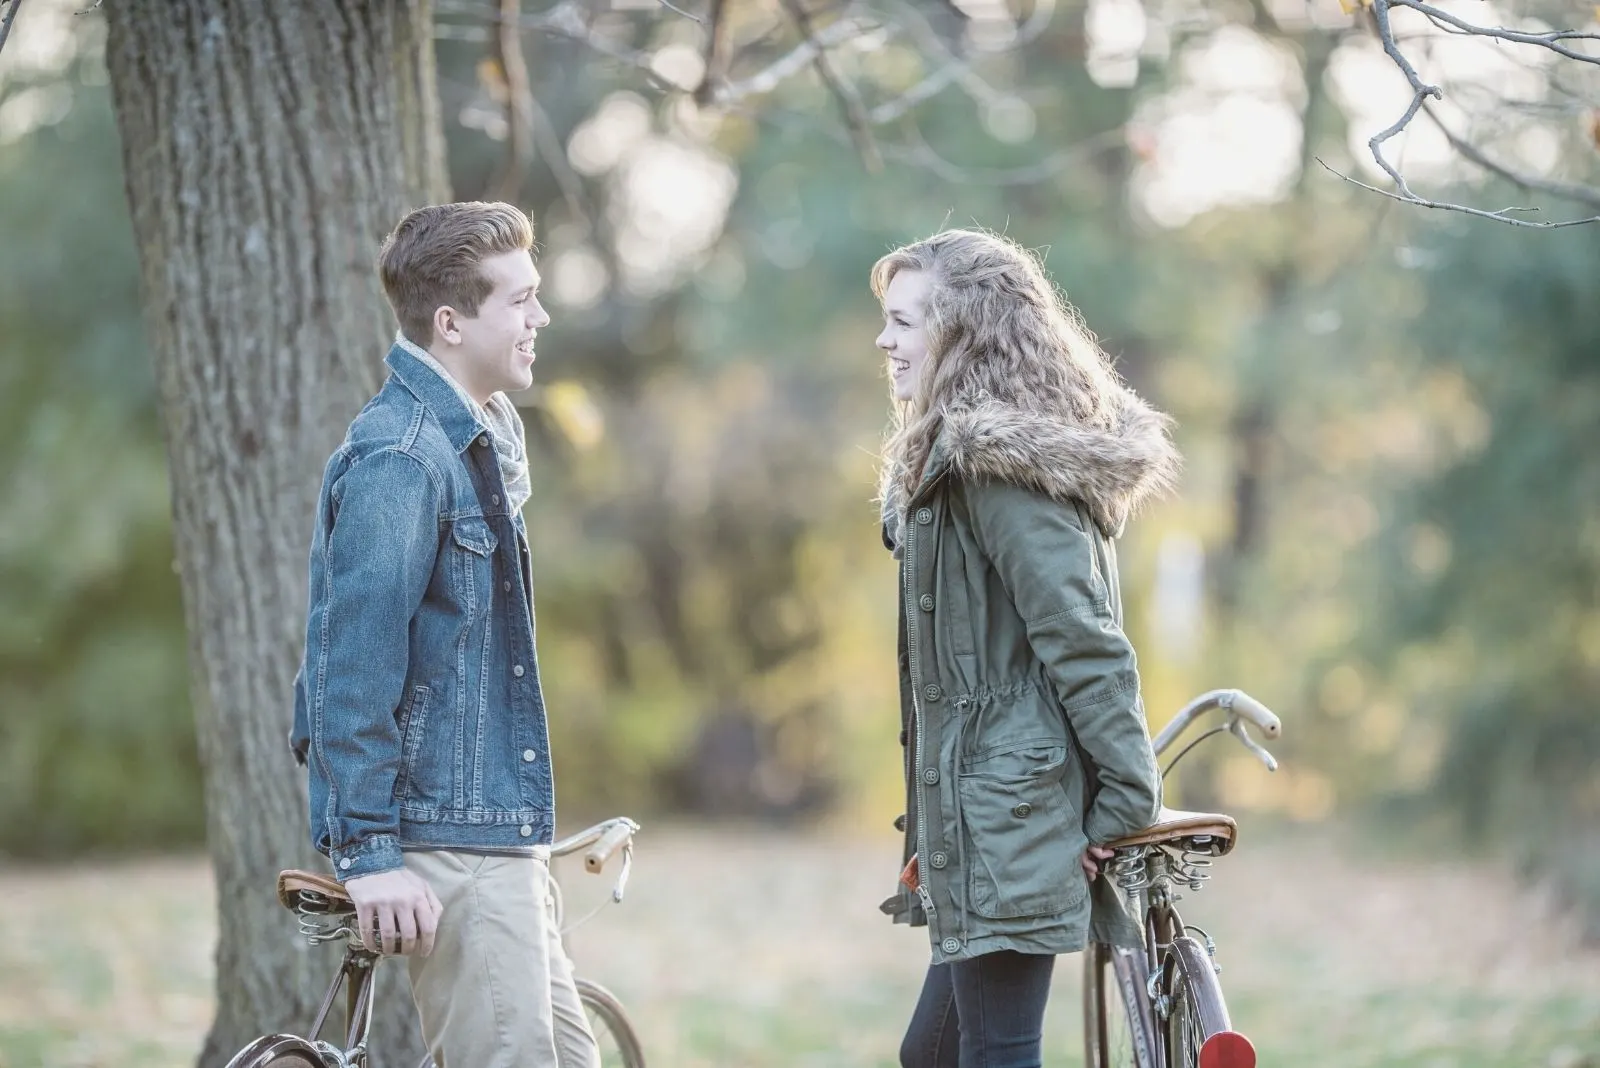 couple talking outdoors dating and biking in the autumn park